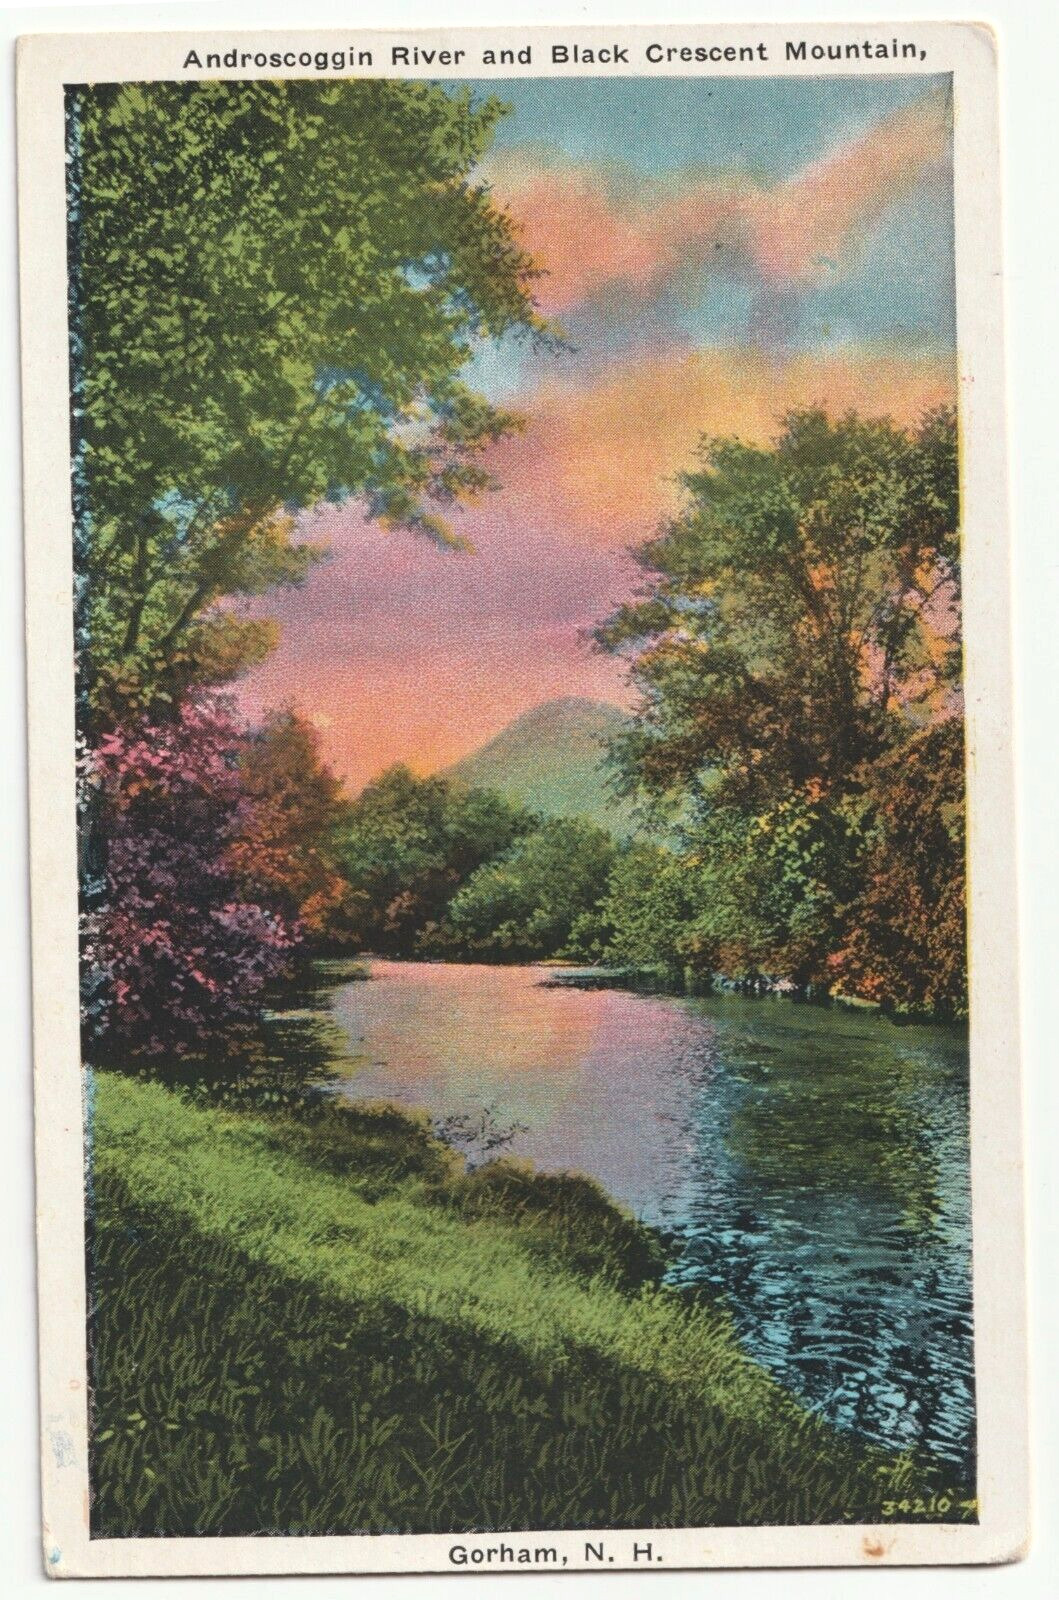 Androscoggin River and Black Crescent Mountains-Gorham, NH-1945 posted